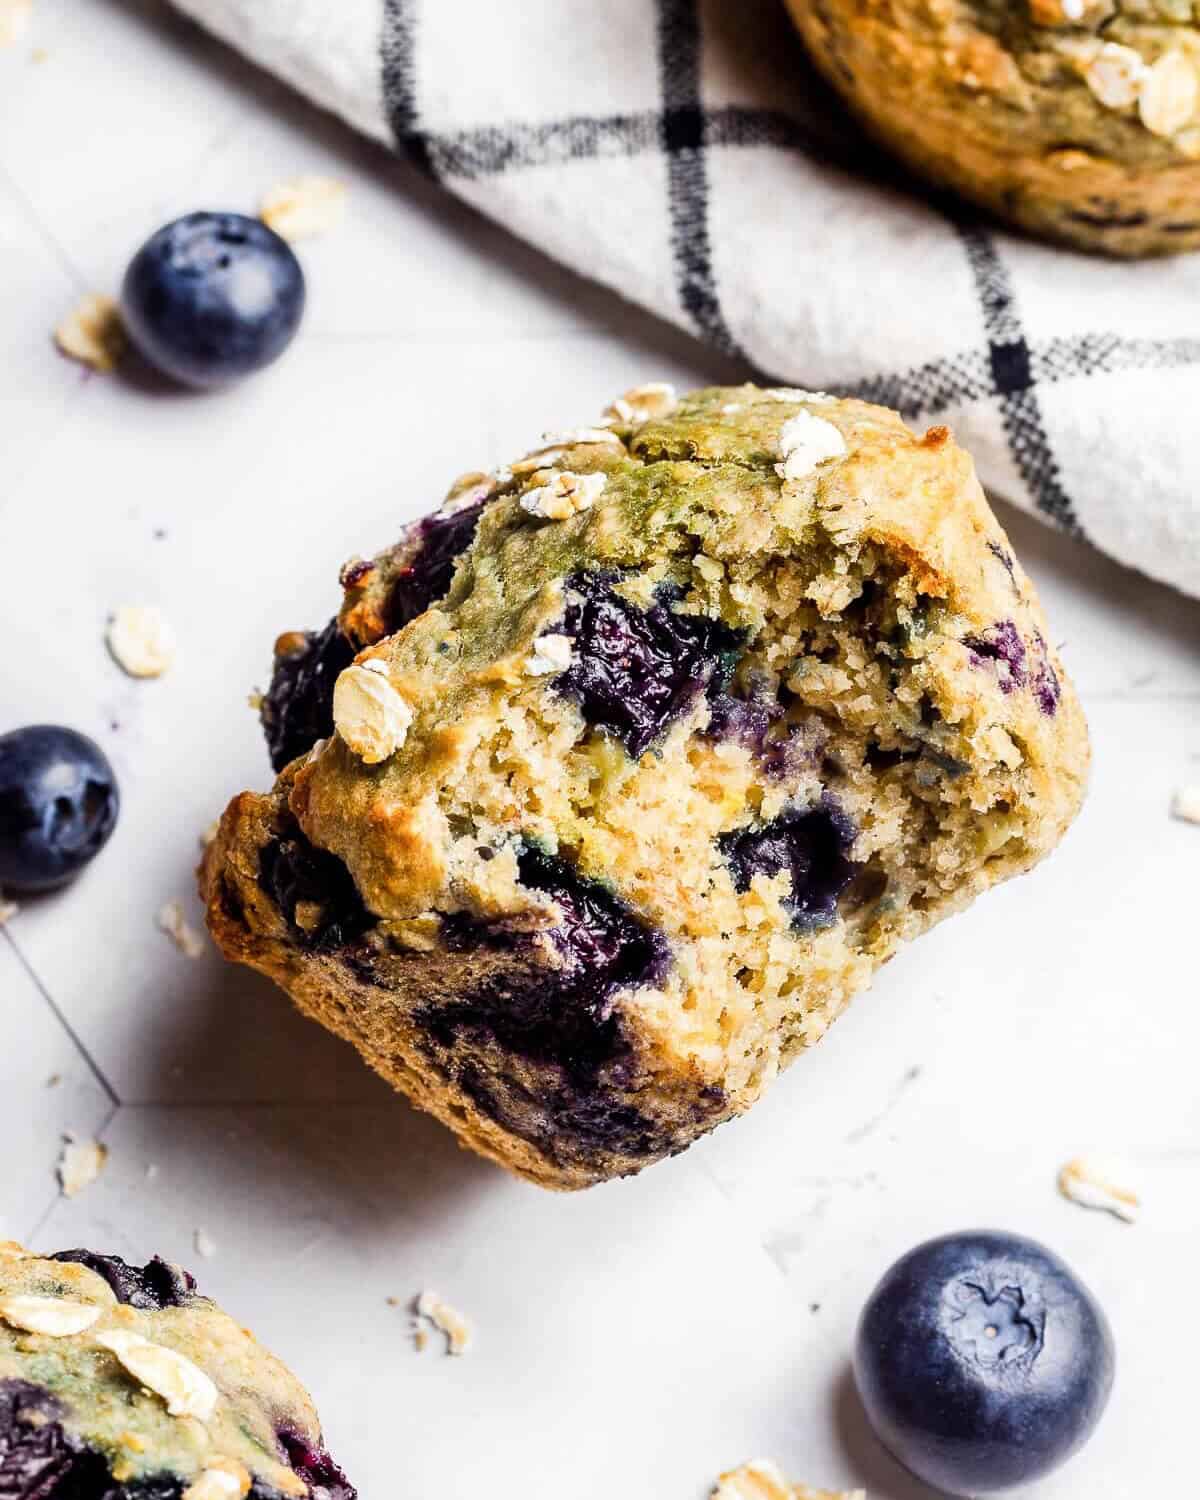 A blueberry banana muffin with a bite missing lying on its side. There is another muffin in the top right hand corner and another in the bottom left corner. There are blueberries and oats scattered around.